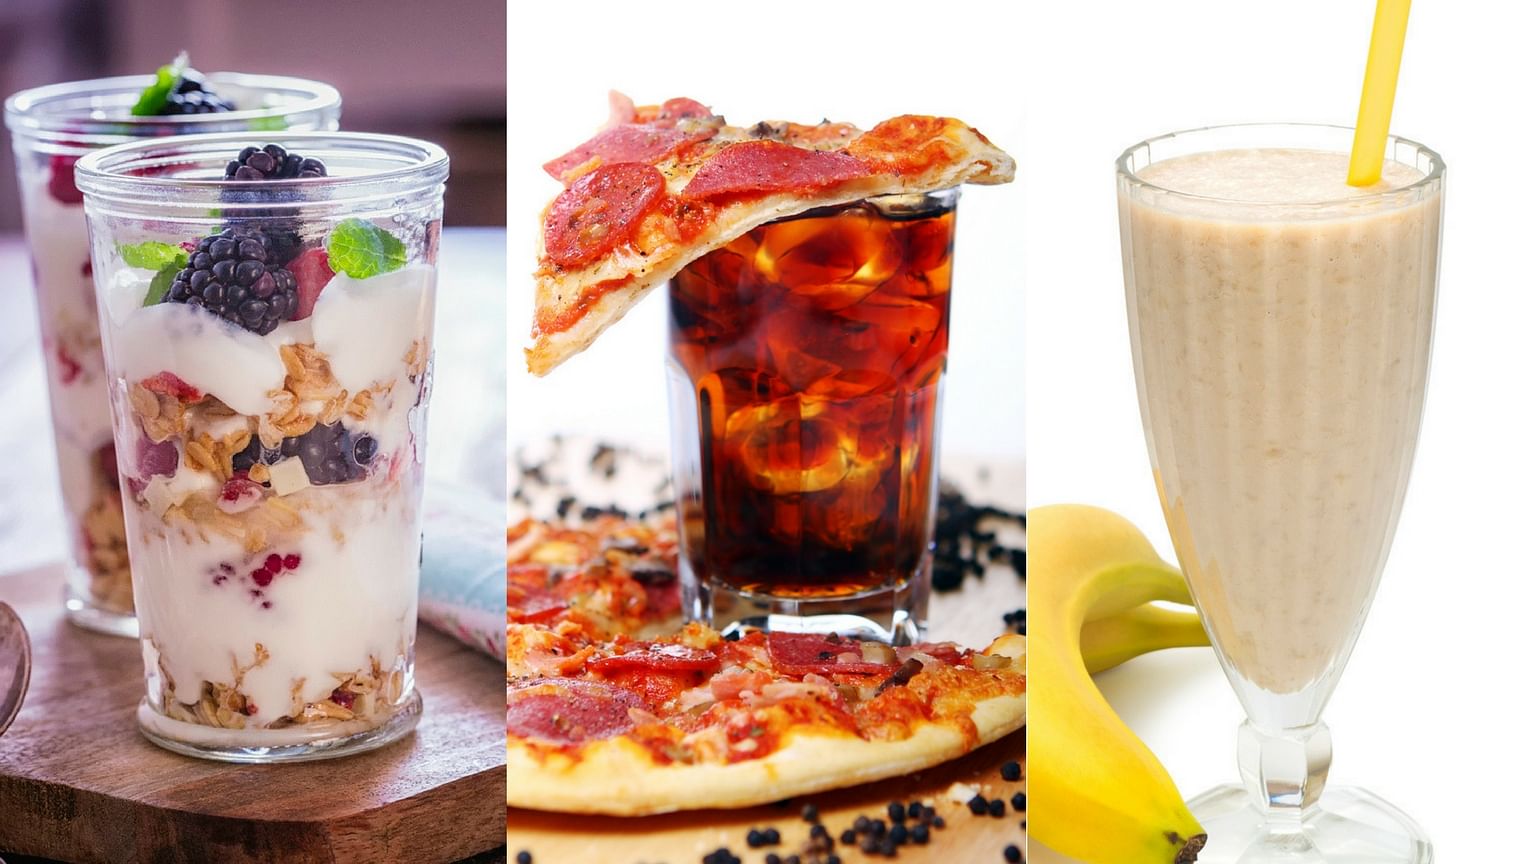 

Yoghurt smoothies with dollops of fruits, cheesy food with aerated drinks and milk with bananas are food combinations you must stay away from.&nbsp;